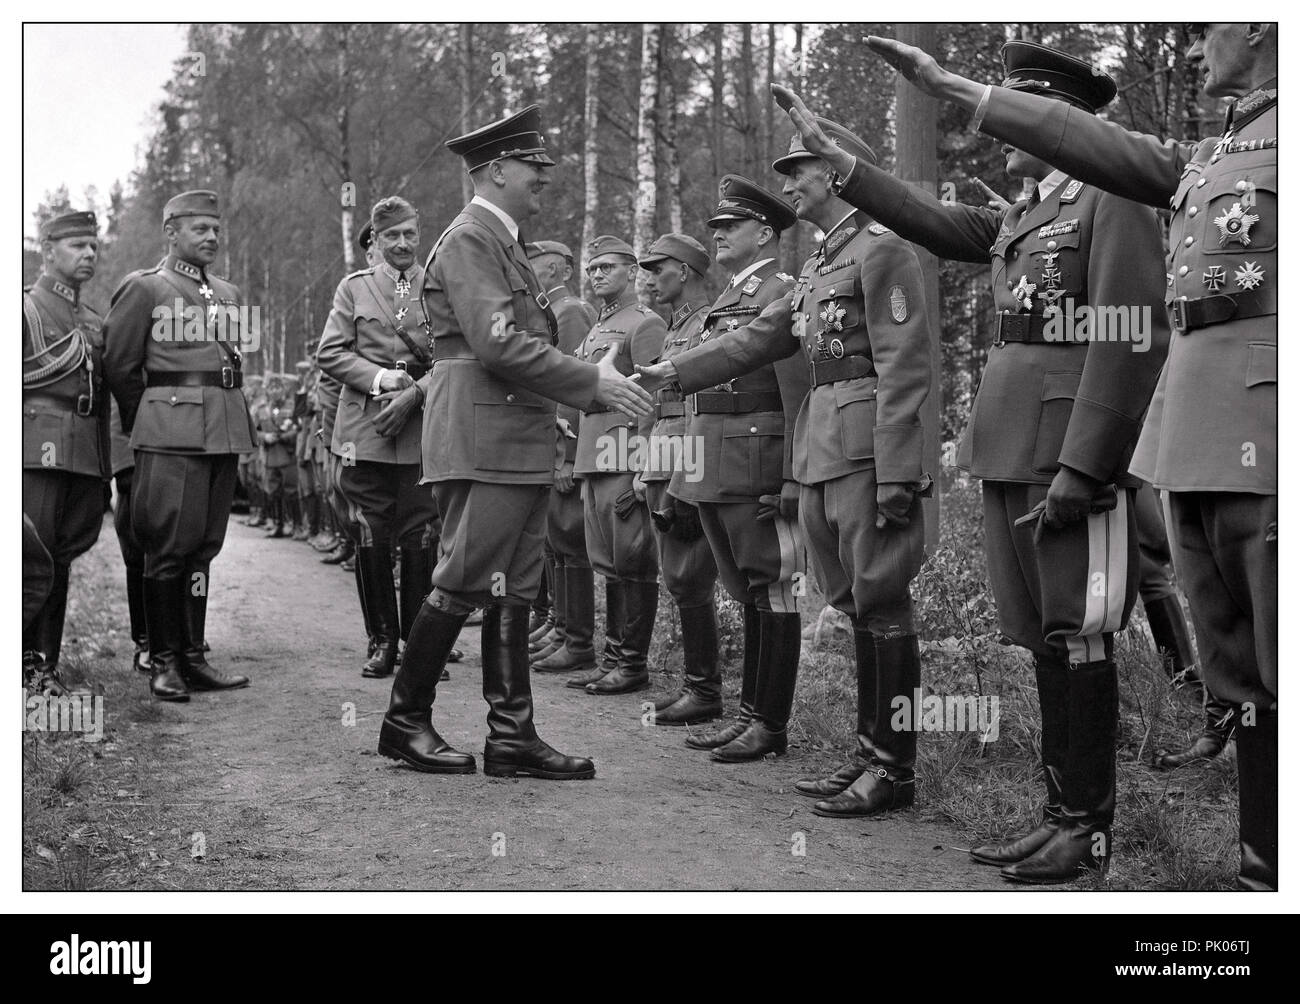 WW2 HITLER meeting with Finnish Military along with high ranking German army officers who are giving him the Nazi Heil Hitler salute, with Field Marshal Mannerheim behind. Adolf Hitler visited Finland on 4 June 1942, ostensibly to congratulate Mannerheim on his 75th birthday. Mannerheim did not want to meet him in his headquarters in Helsinki. The meeting took place near Imatra, in south-eastern Finland, and was arranged in secrecy. From Immola Airfield, Hitler, accompanied by President Ryti, was driven to where Mannerheim was waiting at a railway siding. The meeting was inconclusive... Stock Photo